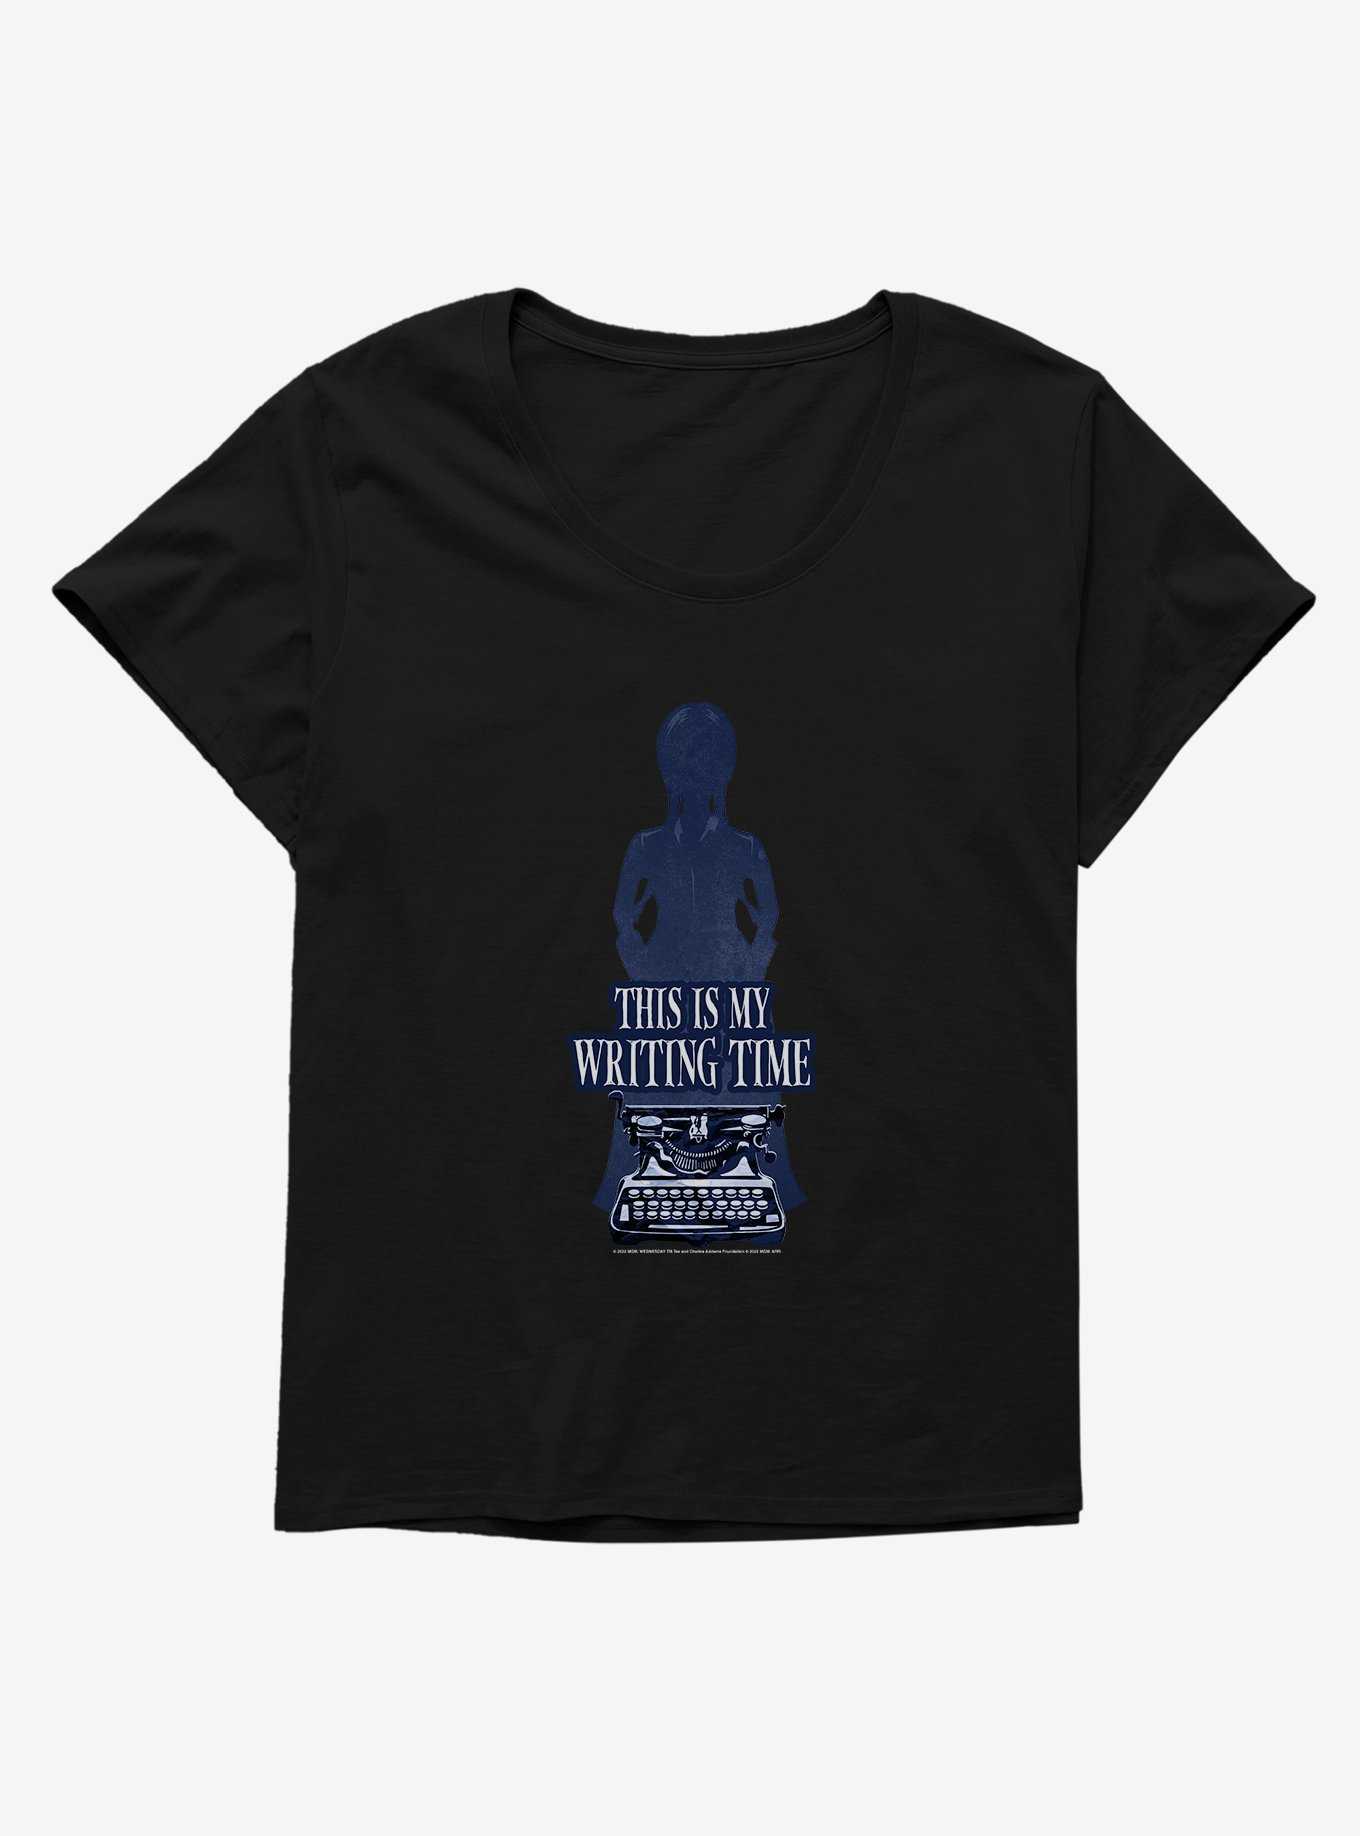 Wednesday My Writing Time Womens T-Shirt Plus Size, , hi-res